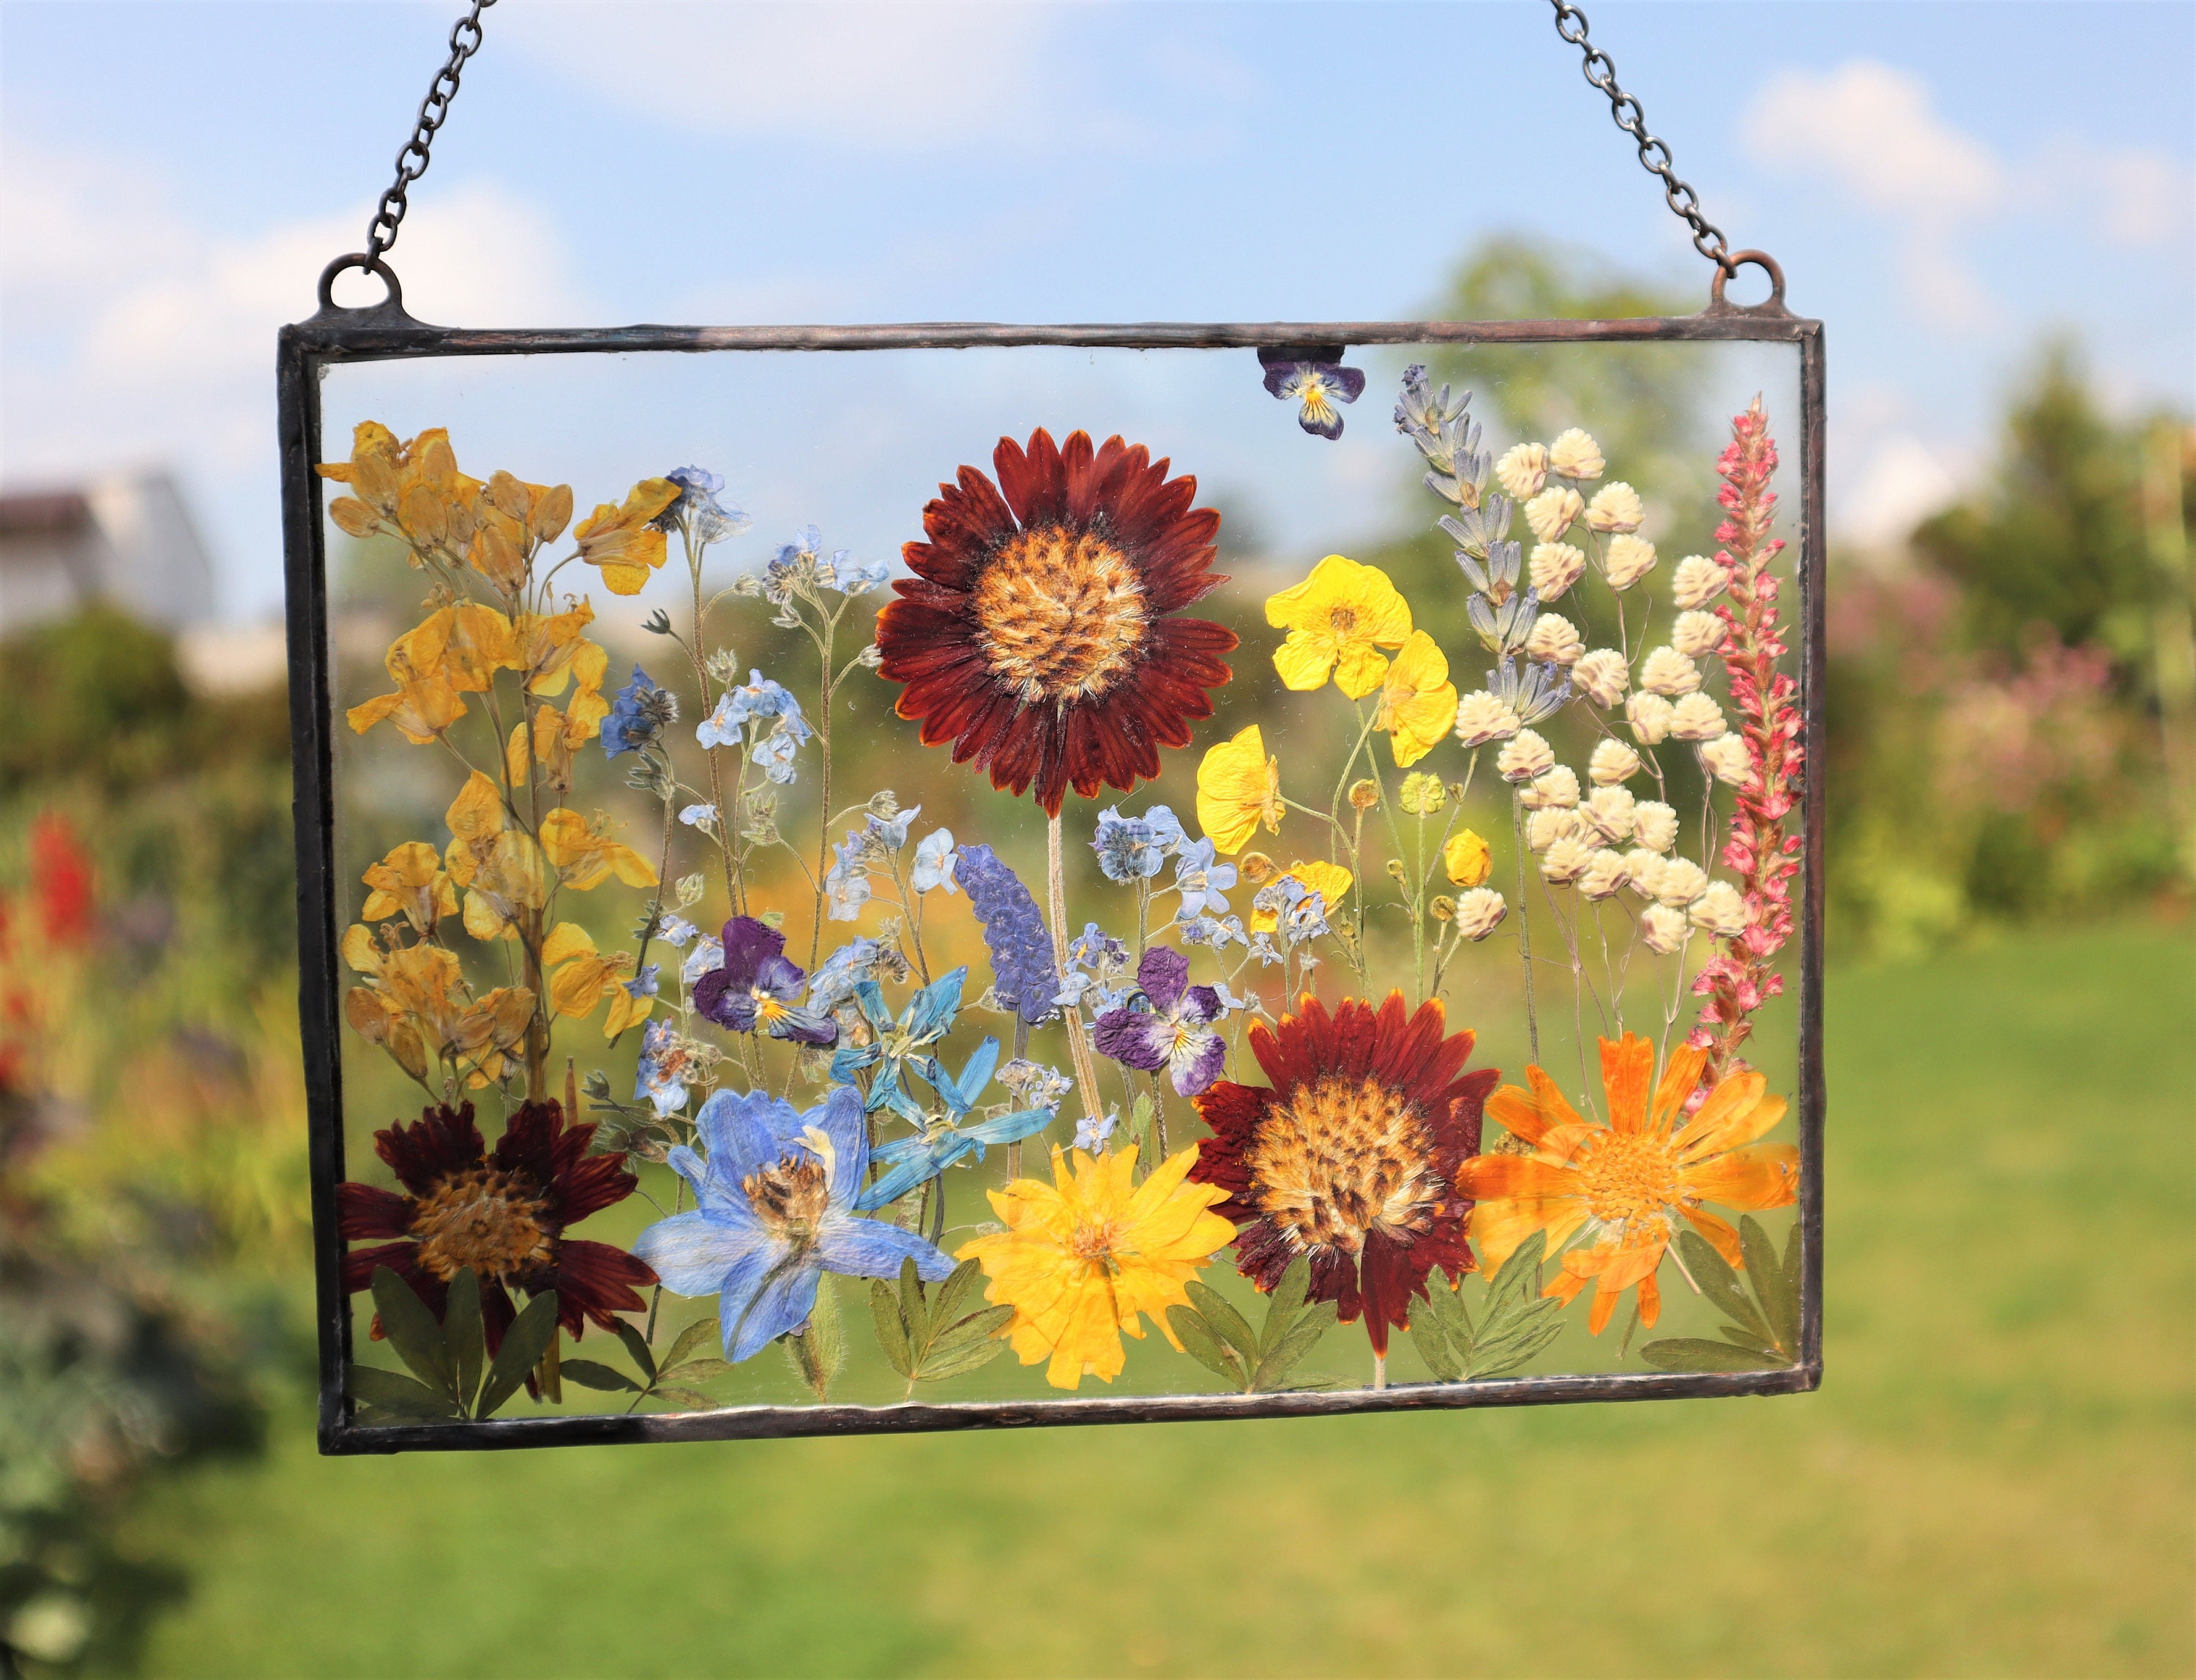 Framing Pressed Flowers Between Glass - Happy Happy Nester